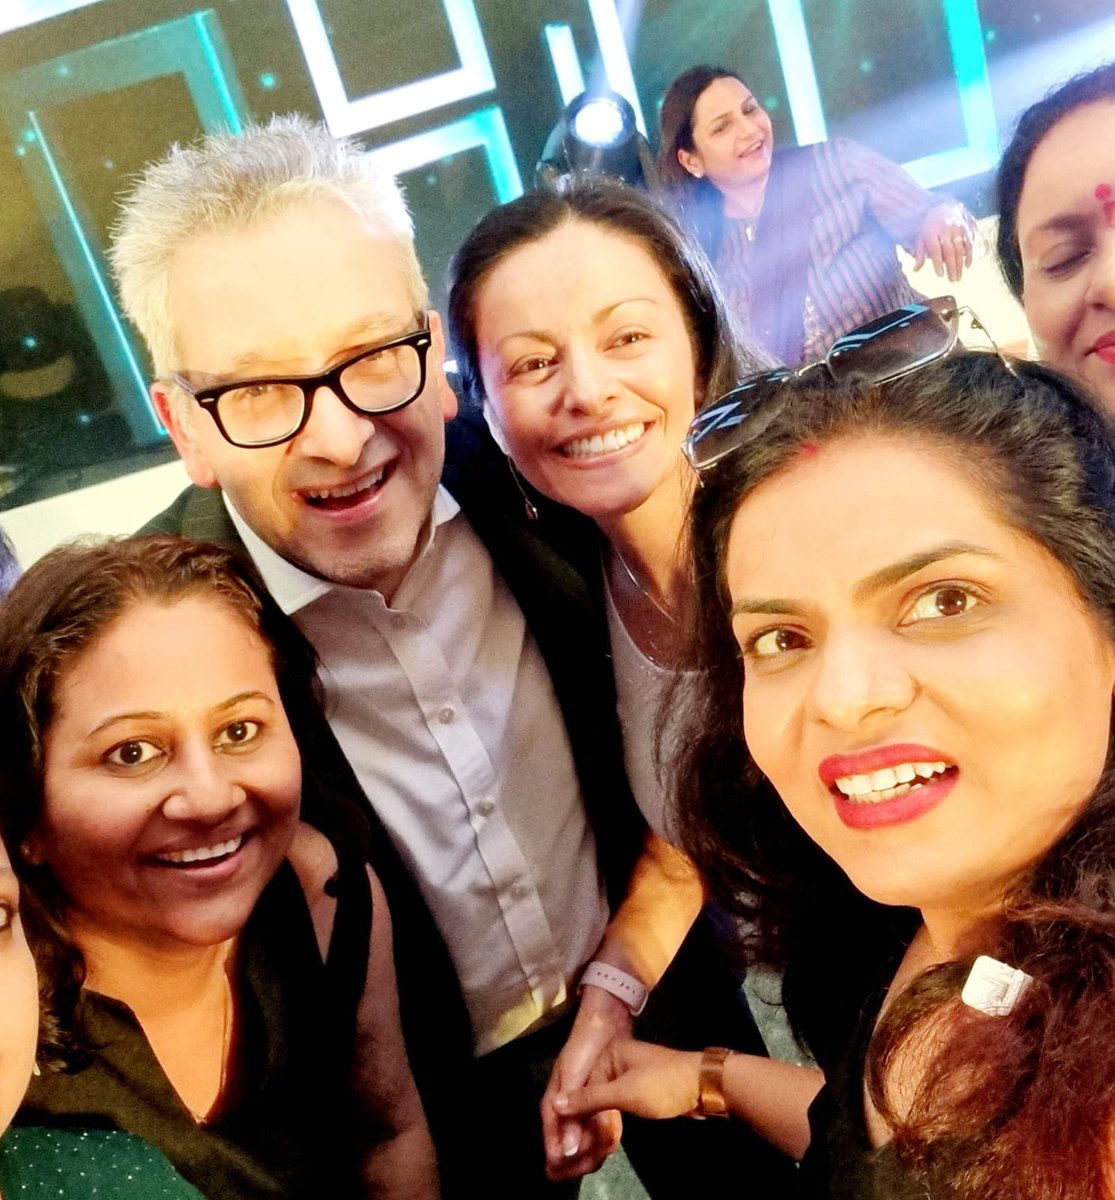 Wonderful evening organised by @Sujathavip with brilliant music, drum playing, fantastic food and dancing Met the many brilliant women interventional cardiologists- this is one of the most fun high energy meetings I've been to. Indian women ICs rock. @DrSaritaRao2